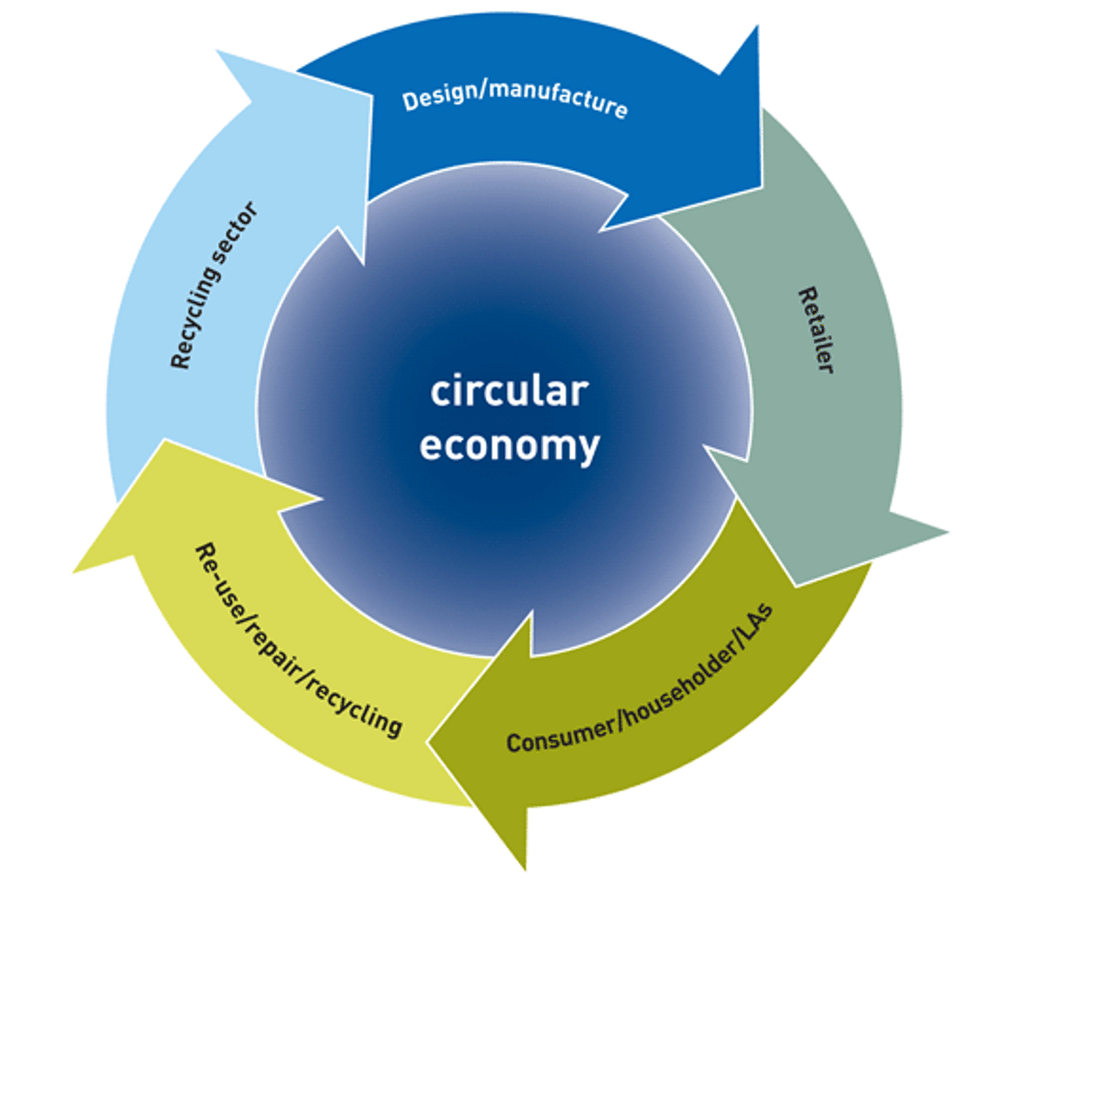 A1Customer is all about circular economy, recycling and reusing culture - A1 Customer